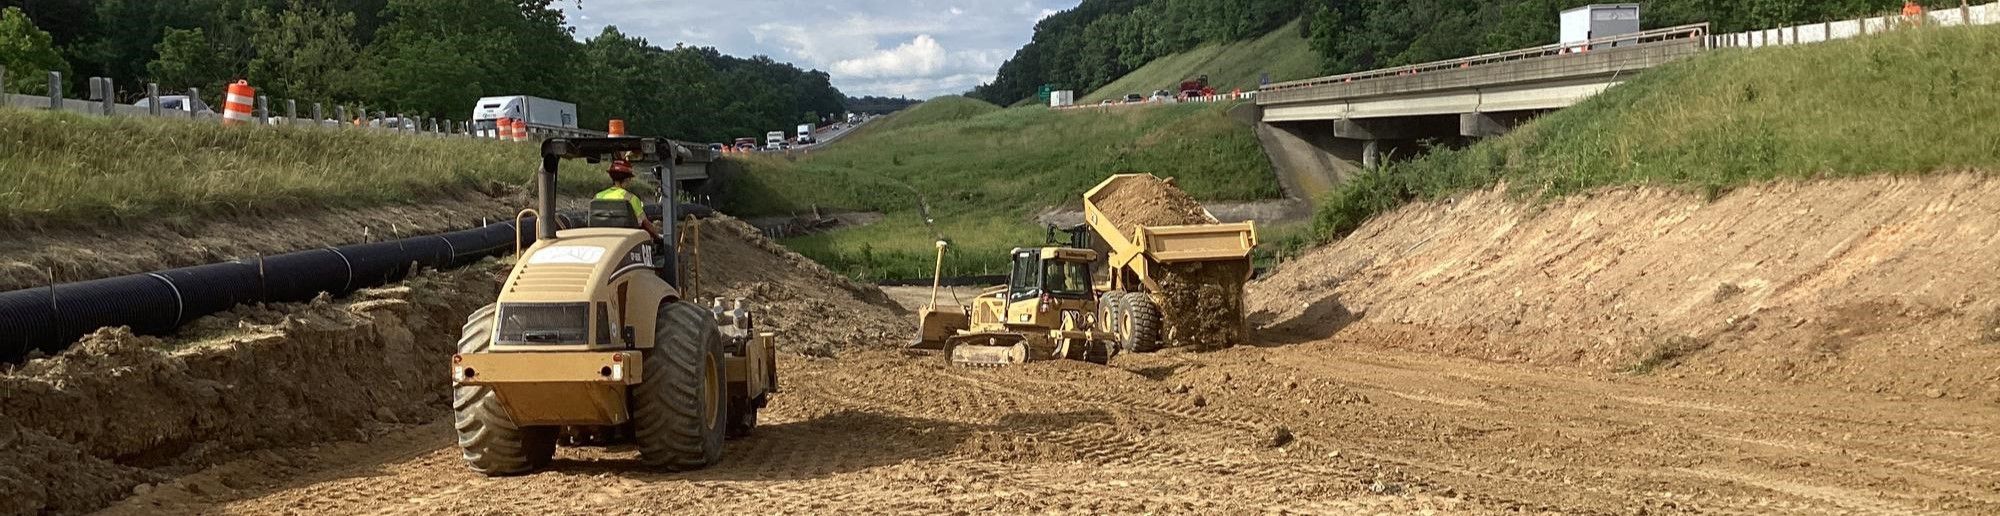 Heavy equipment moving earth in the median of Interstate 81 in the Staunton area